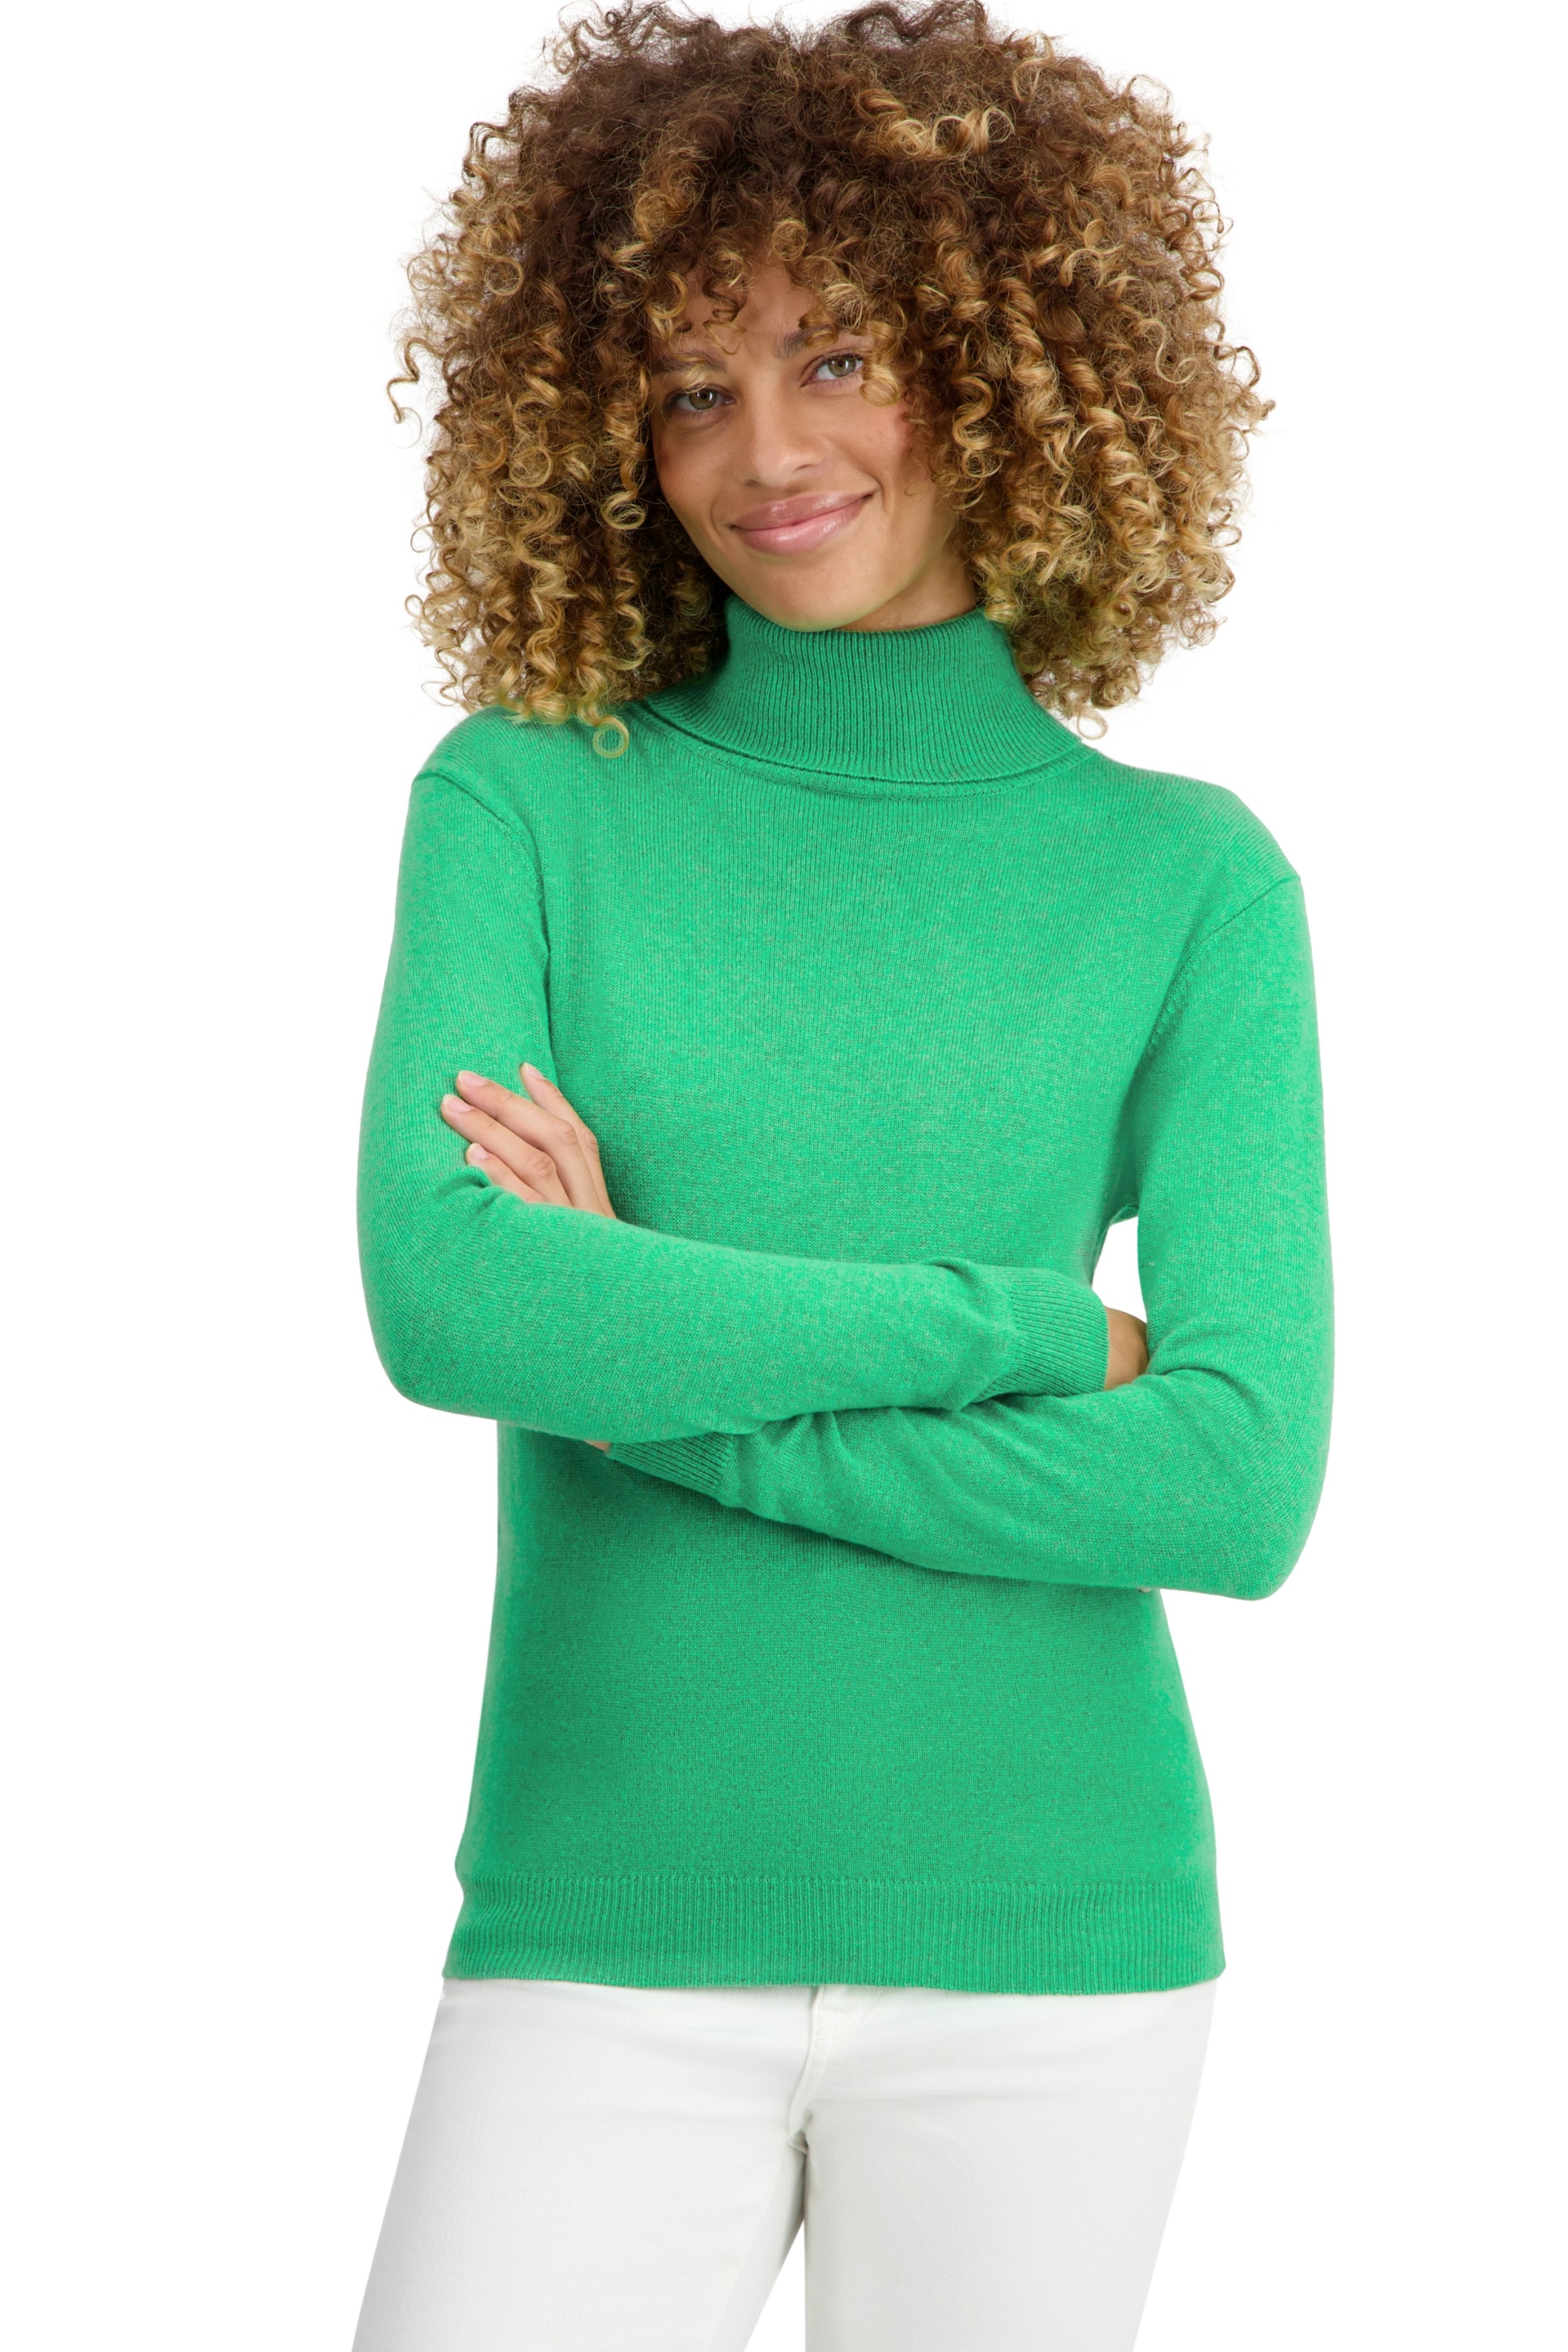 Cashmere ladies basic sweaters at low prices tale first midori l